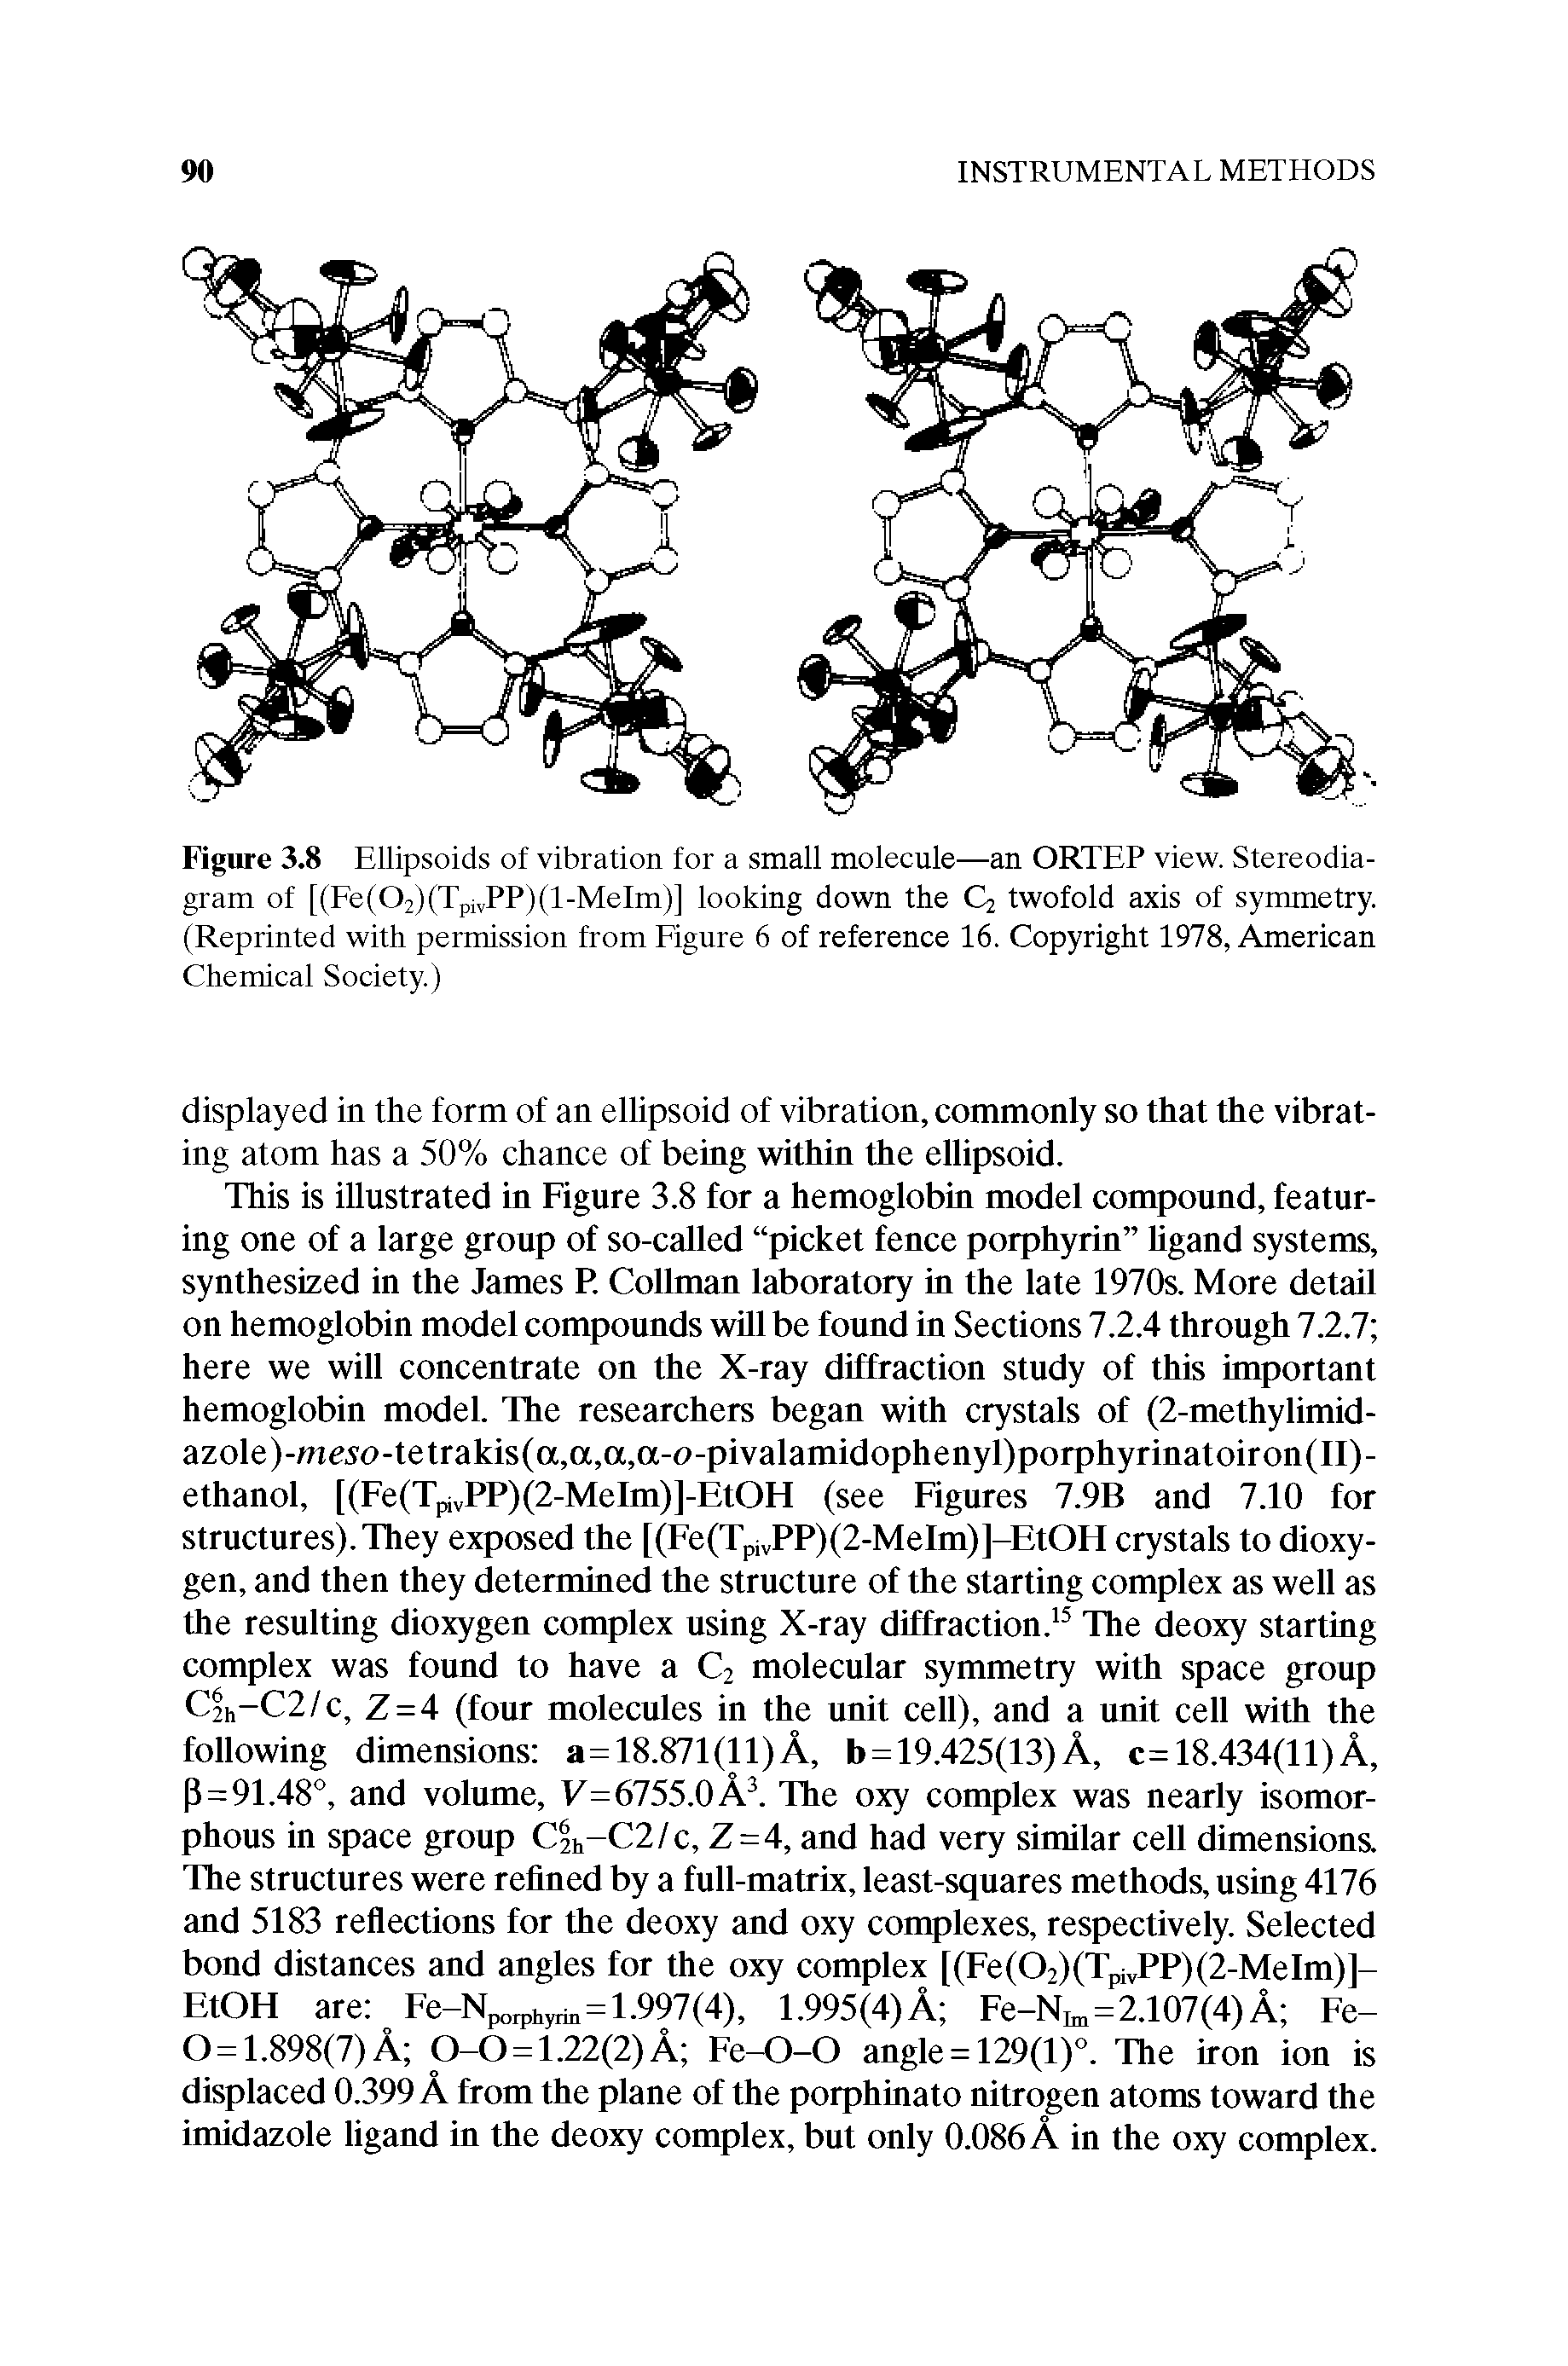 Figure 3.8 Ellipsoids of vibration for a small molecule—an ORTEP view. Stereodiagram of [(Ee(02)(Tpi,PP)(l-MeIm)] looking down the C2 twofold axis of symmetry. (Reprinted with permission from Eigure 6 of reference 16. Copyright 1978, American Chemical Society.)...